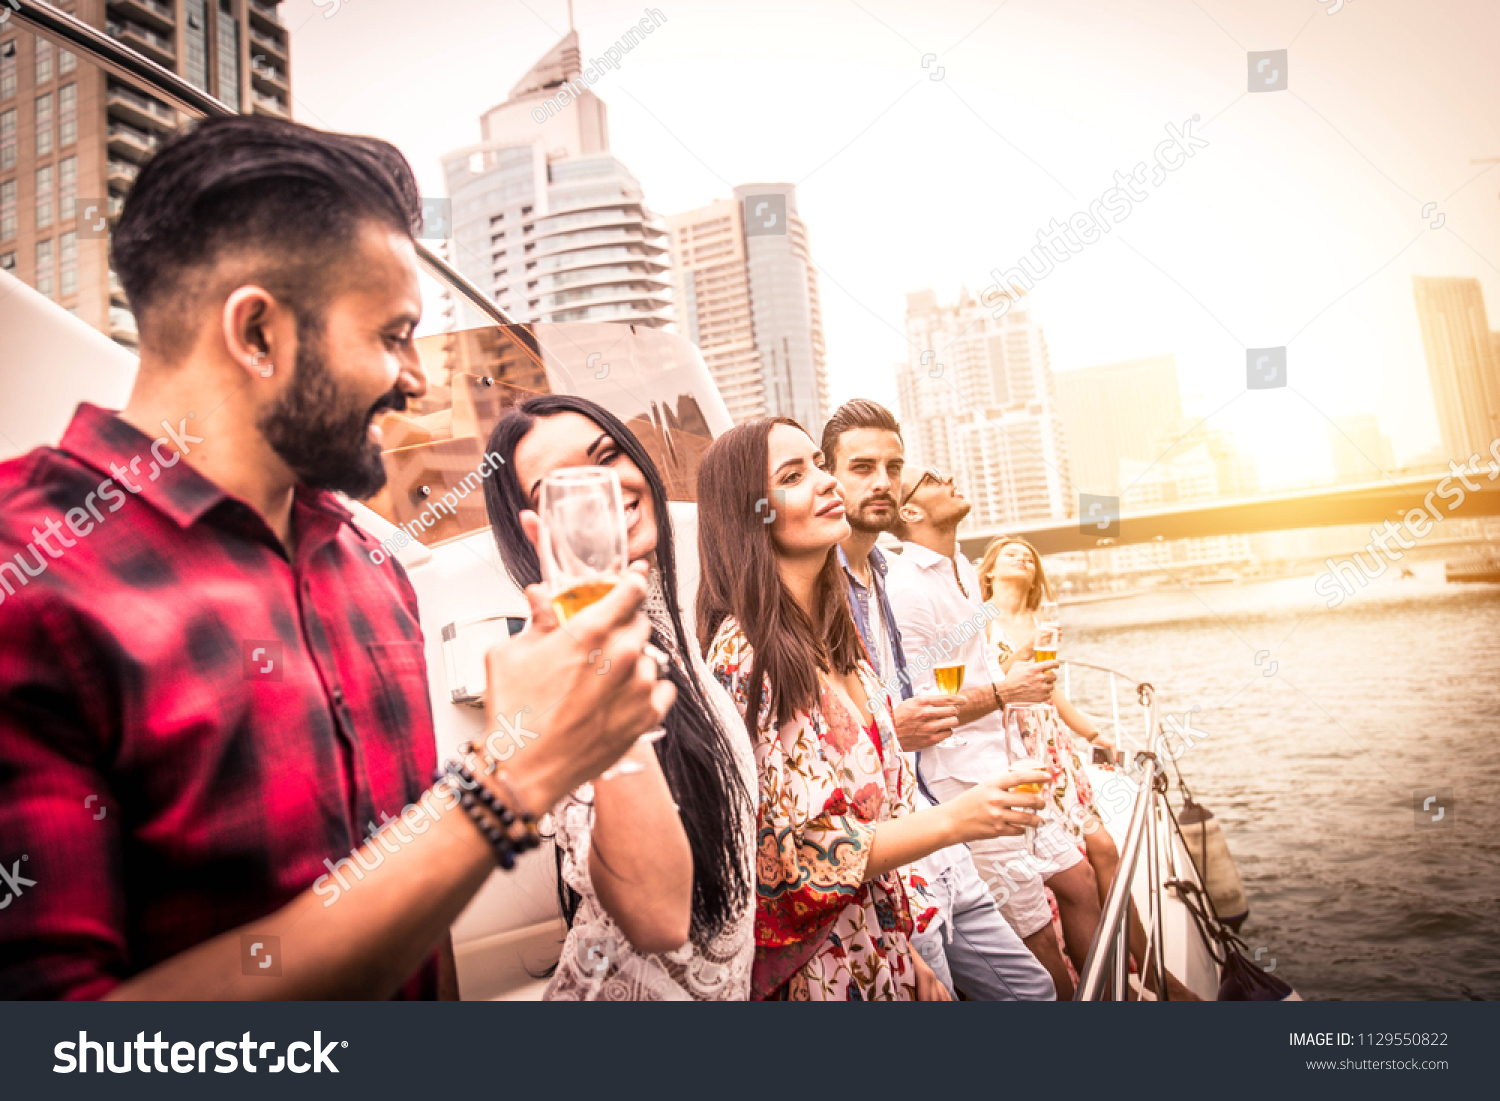 Group of friends making party on a yacht in Dubai - Happy people having a fancy party on a luxury boat #1129550822